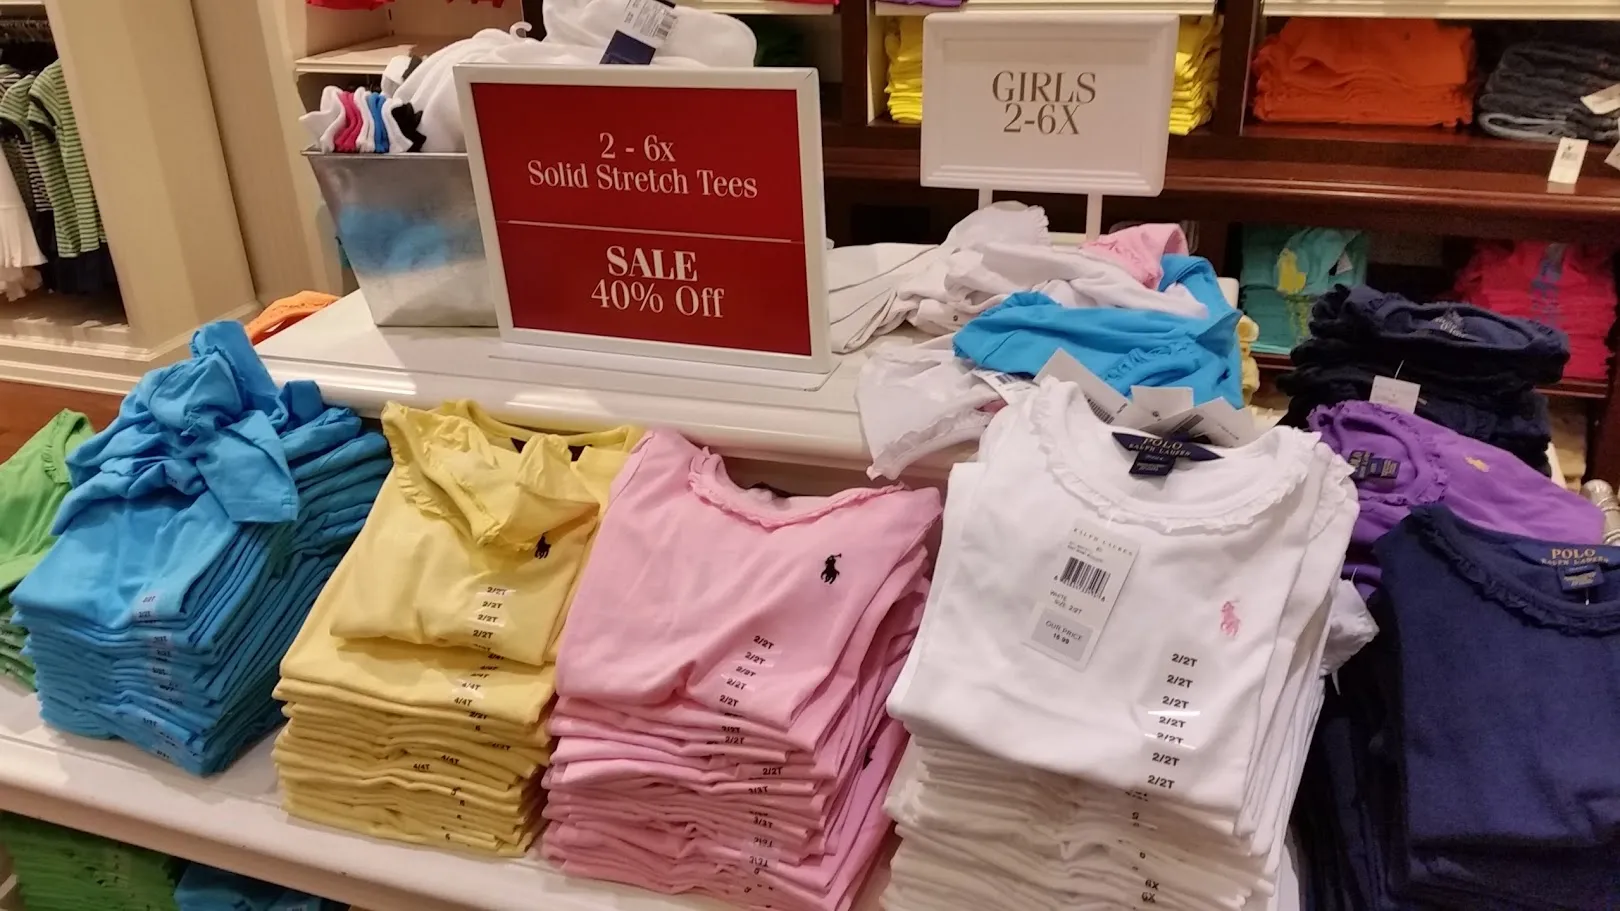 Polo store in the Orlando Premium Outlet